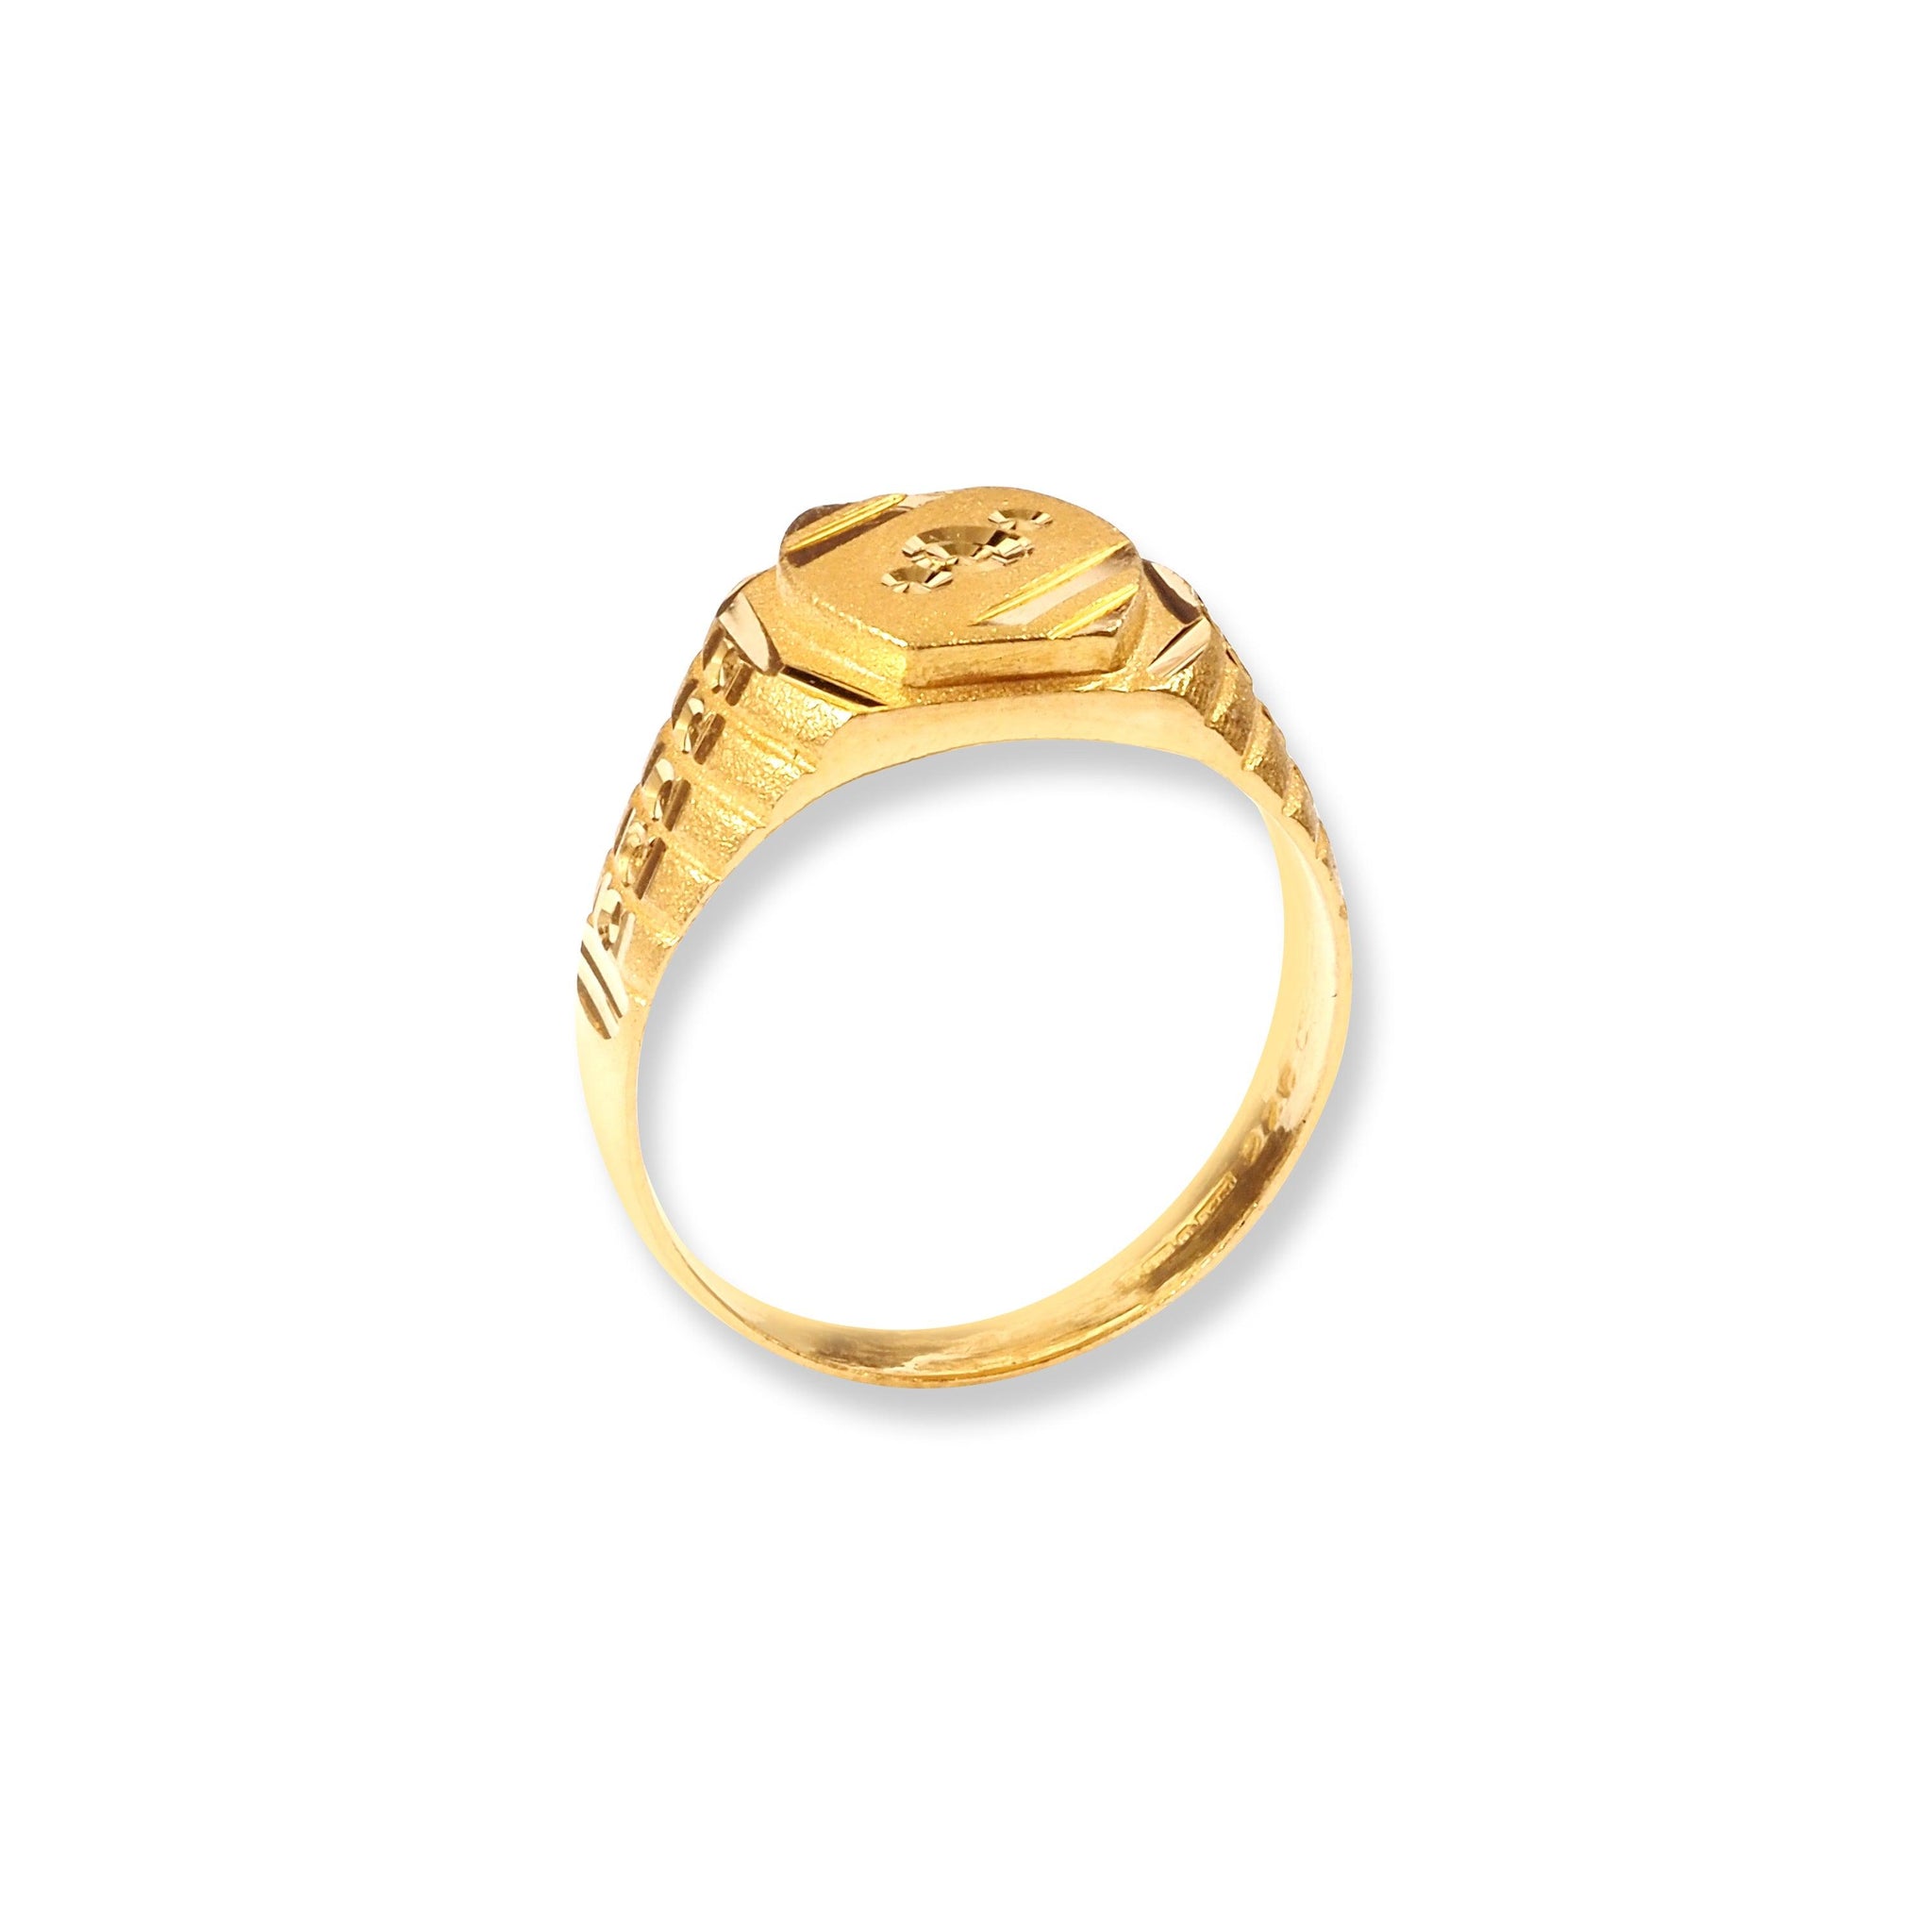 22ct Gold Gents Signet Ring GBR-8320